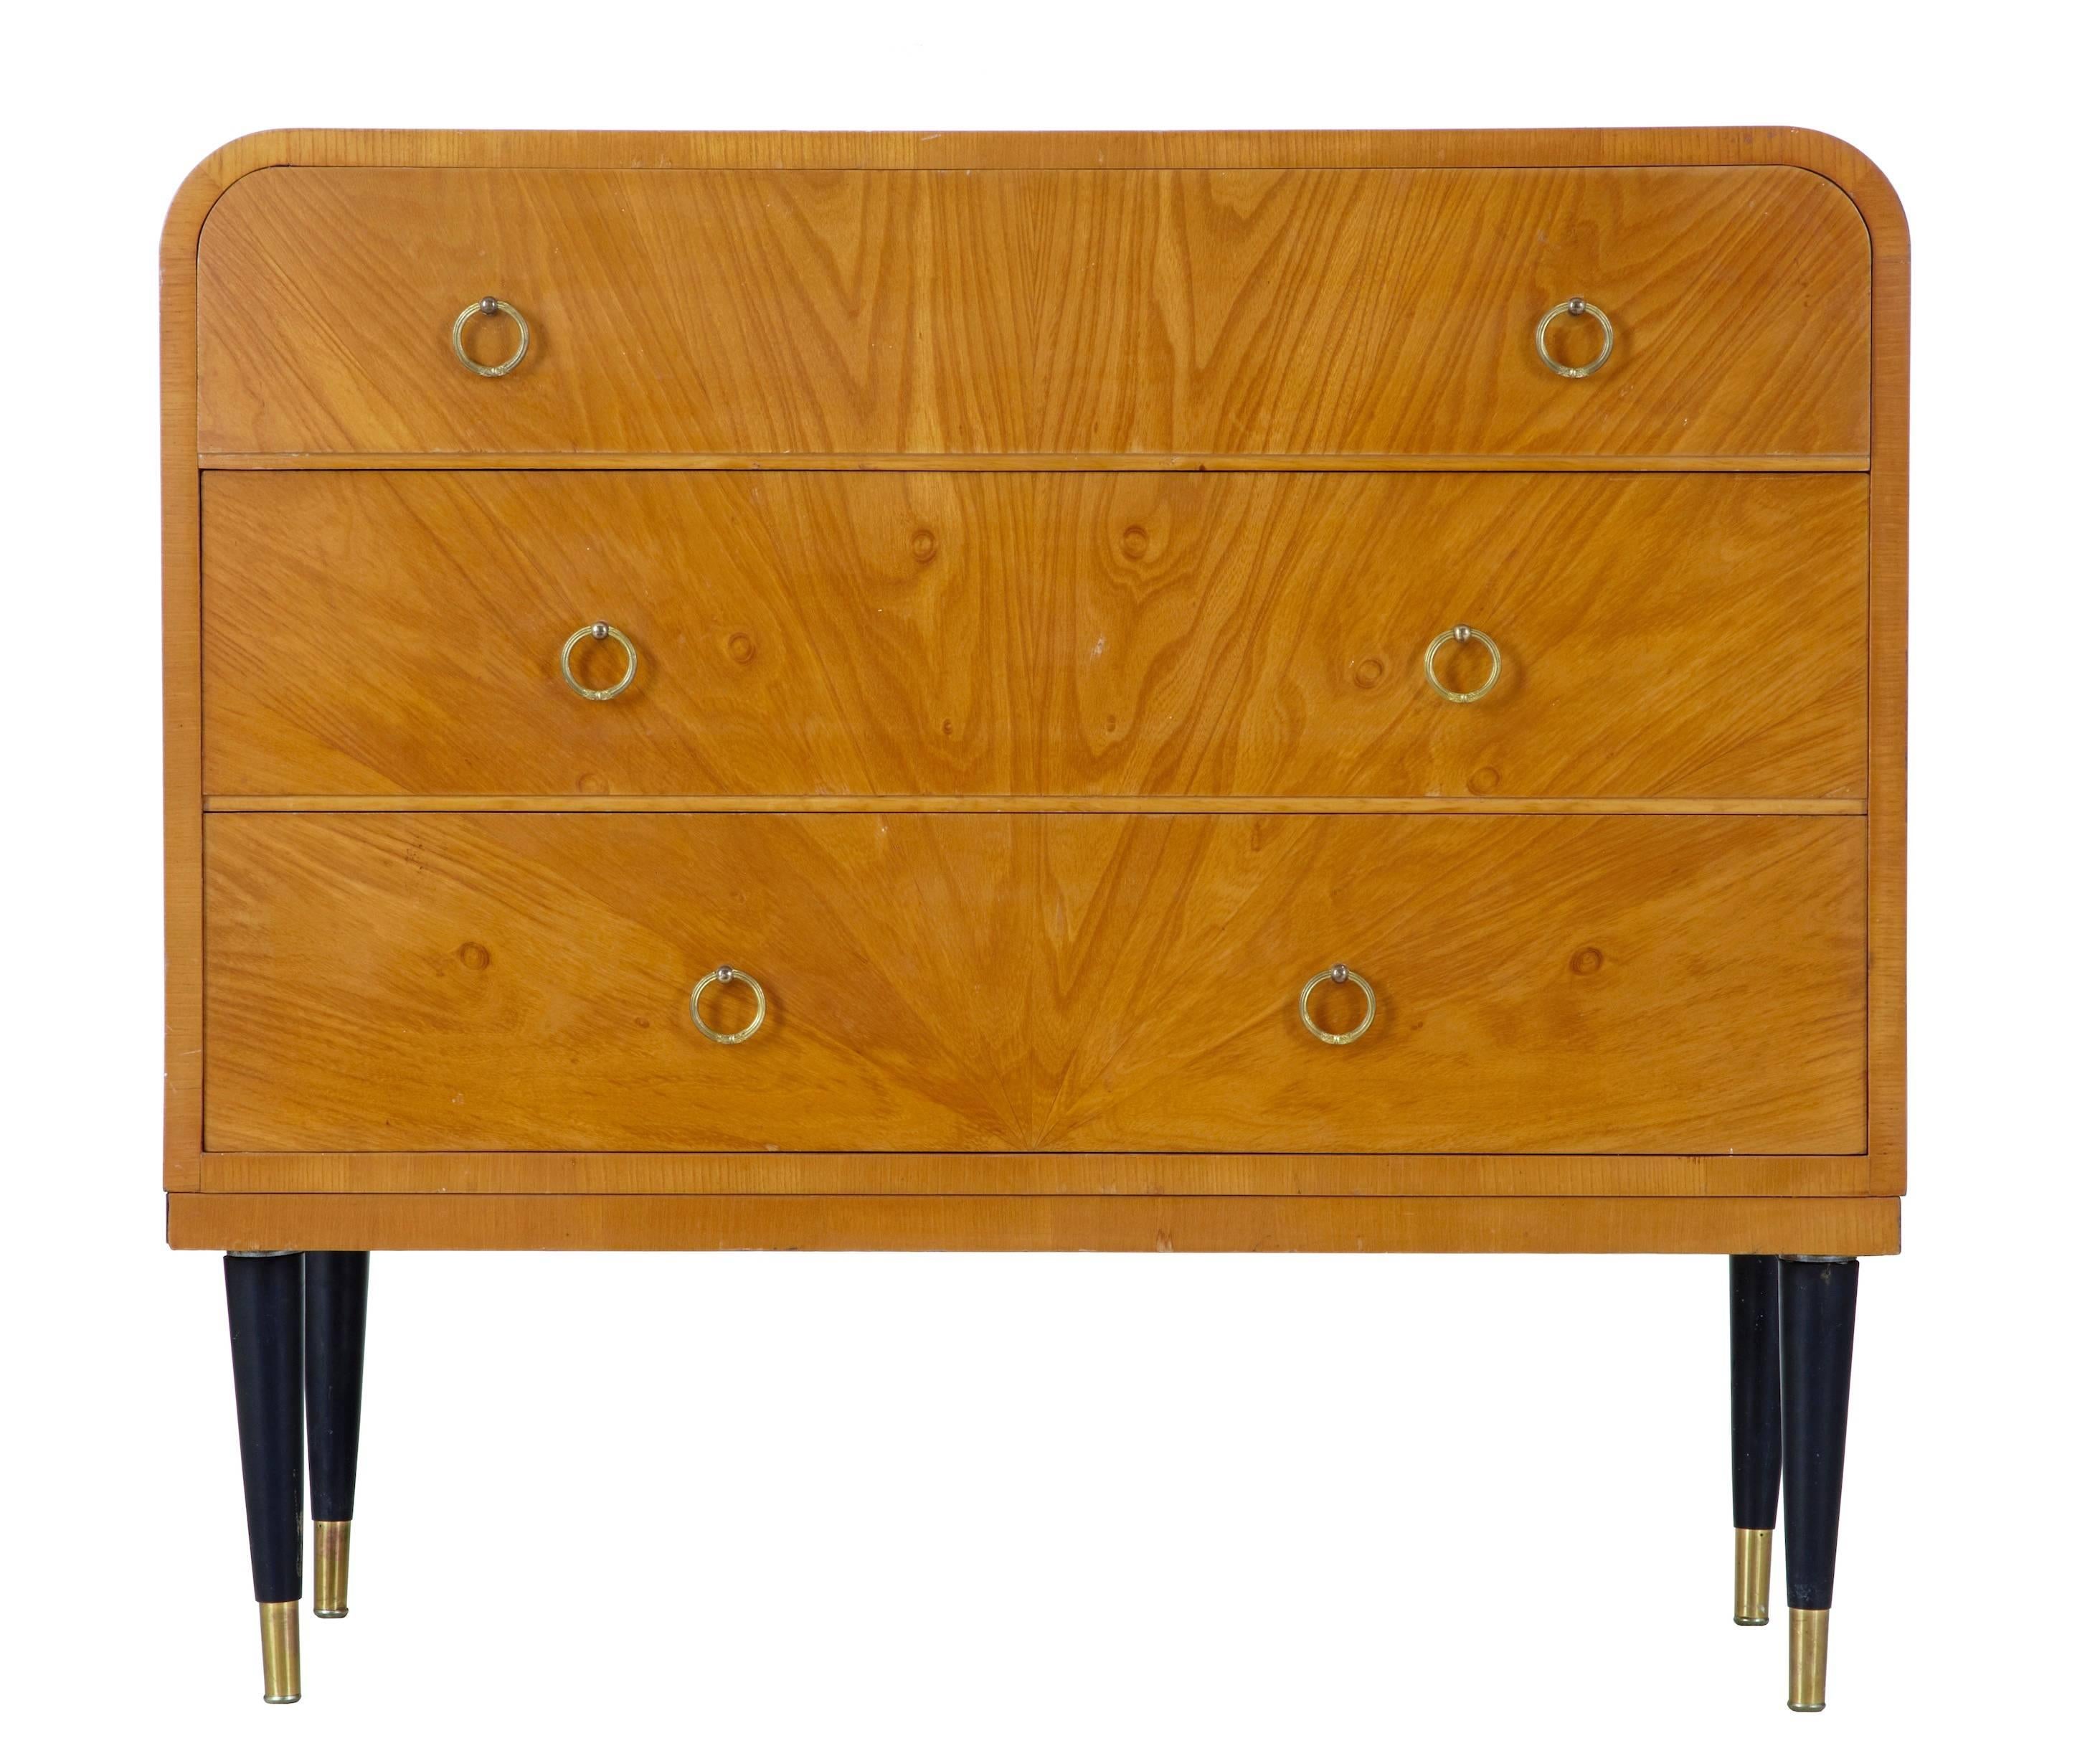 Swedish elm chest of drawers in the deco taste, circa 1950.
Three drawers with brass ringed handles.
Shaped sides, standing on ebonised legs with brass tips.

Some polish loss to the top, please see pictures. We could undertake the work at